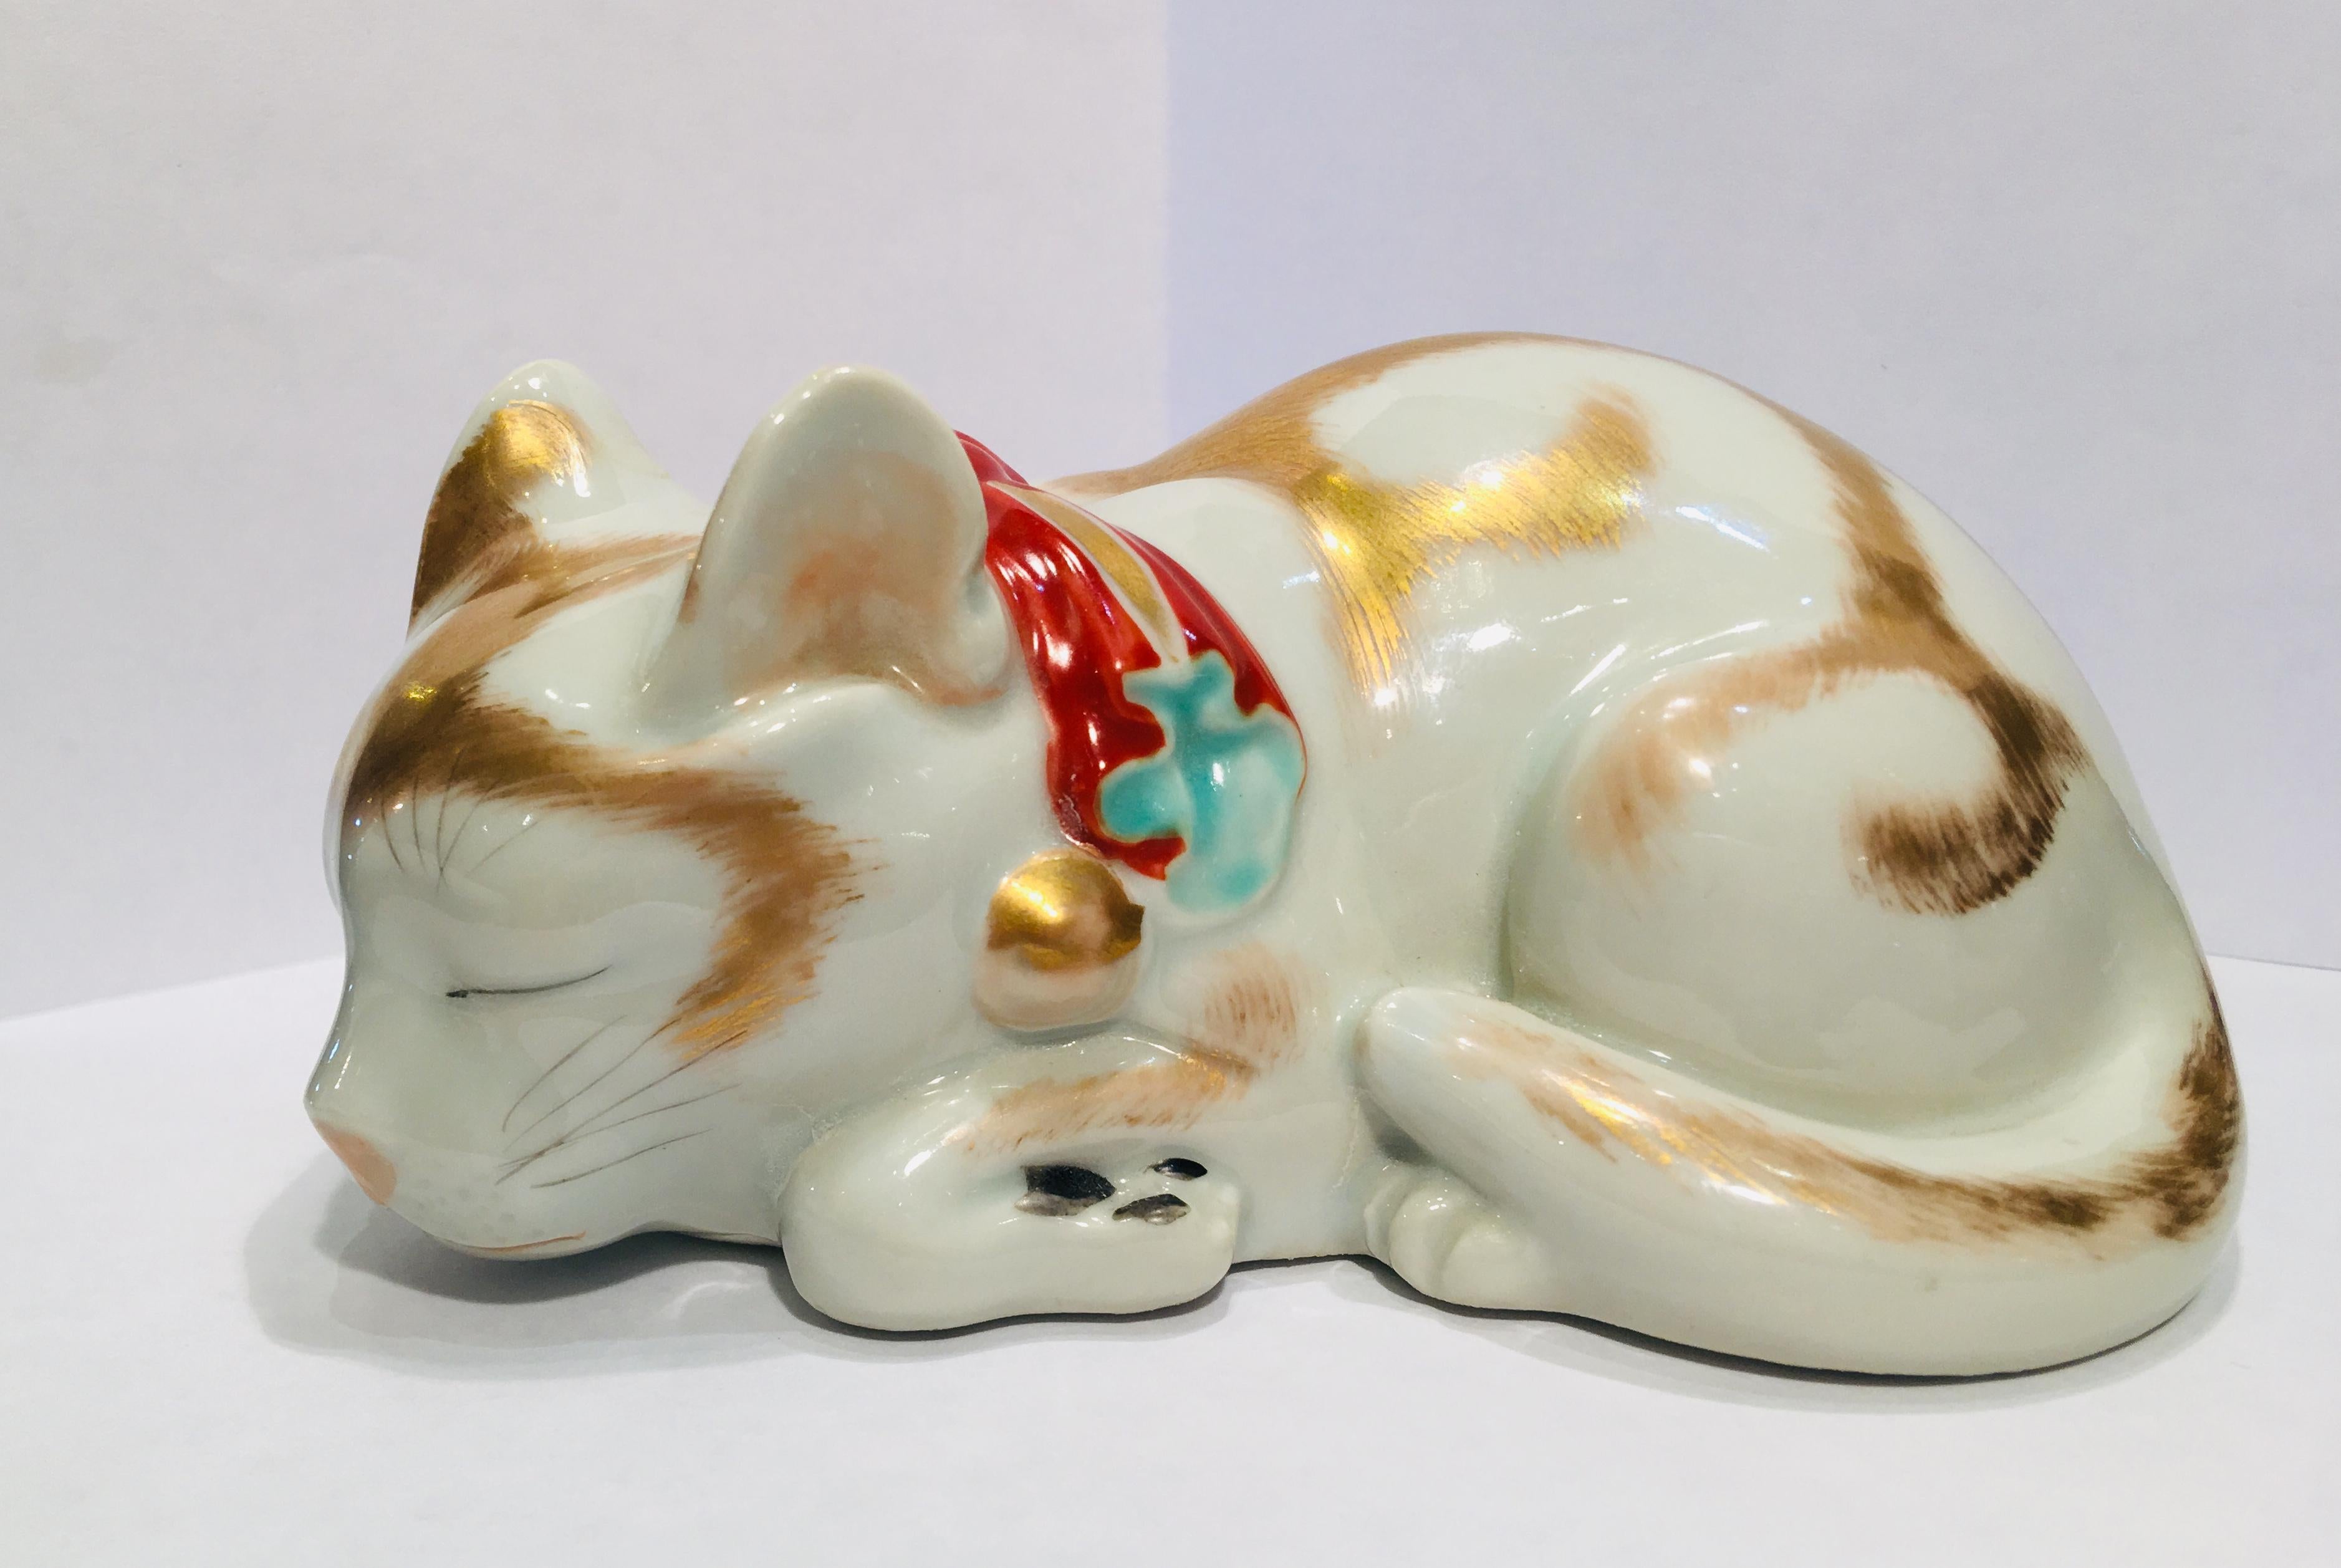 Very precious Kutani Japanese fine porcelain figurine of a curled up, peacefully sleeping little kitten is lavishly hand painted in 24-karat gold and features a large orange and gold bow with gold bells and blue accents.

From the Taisho period,